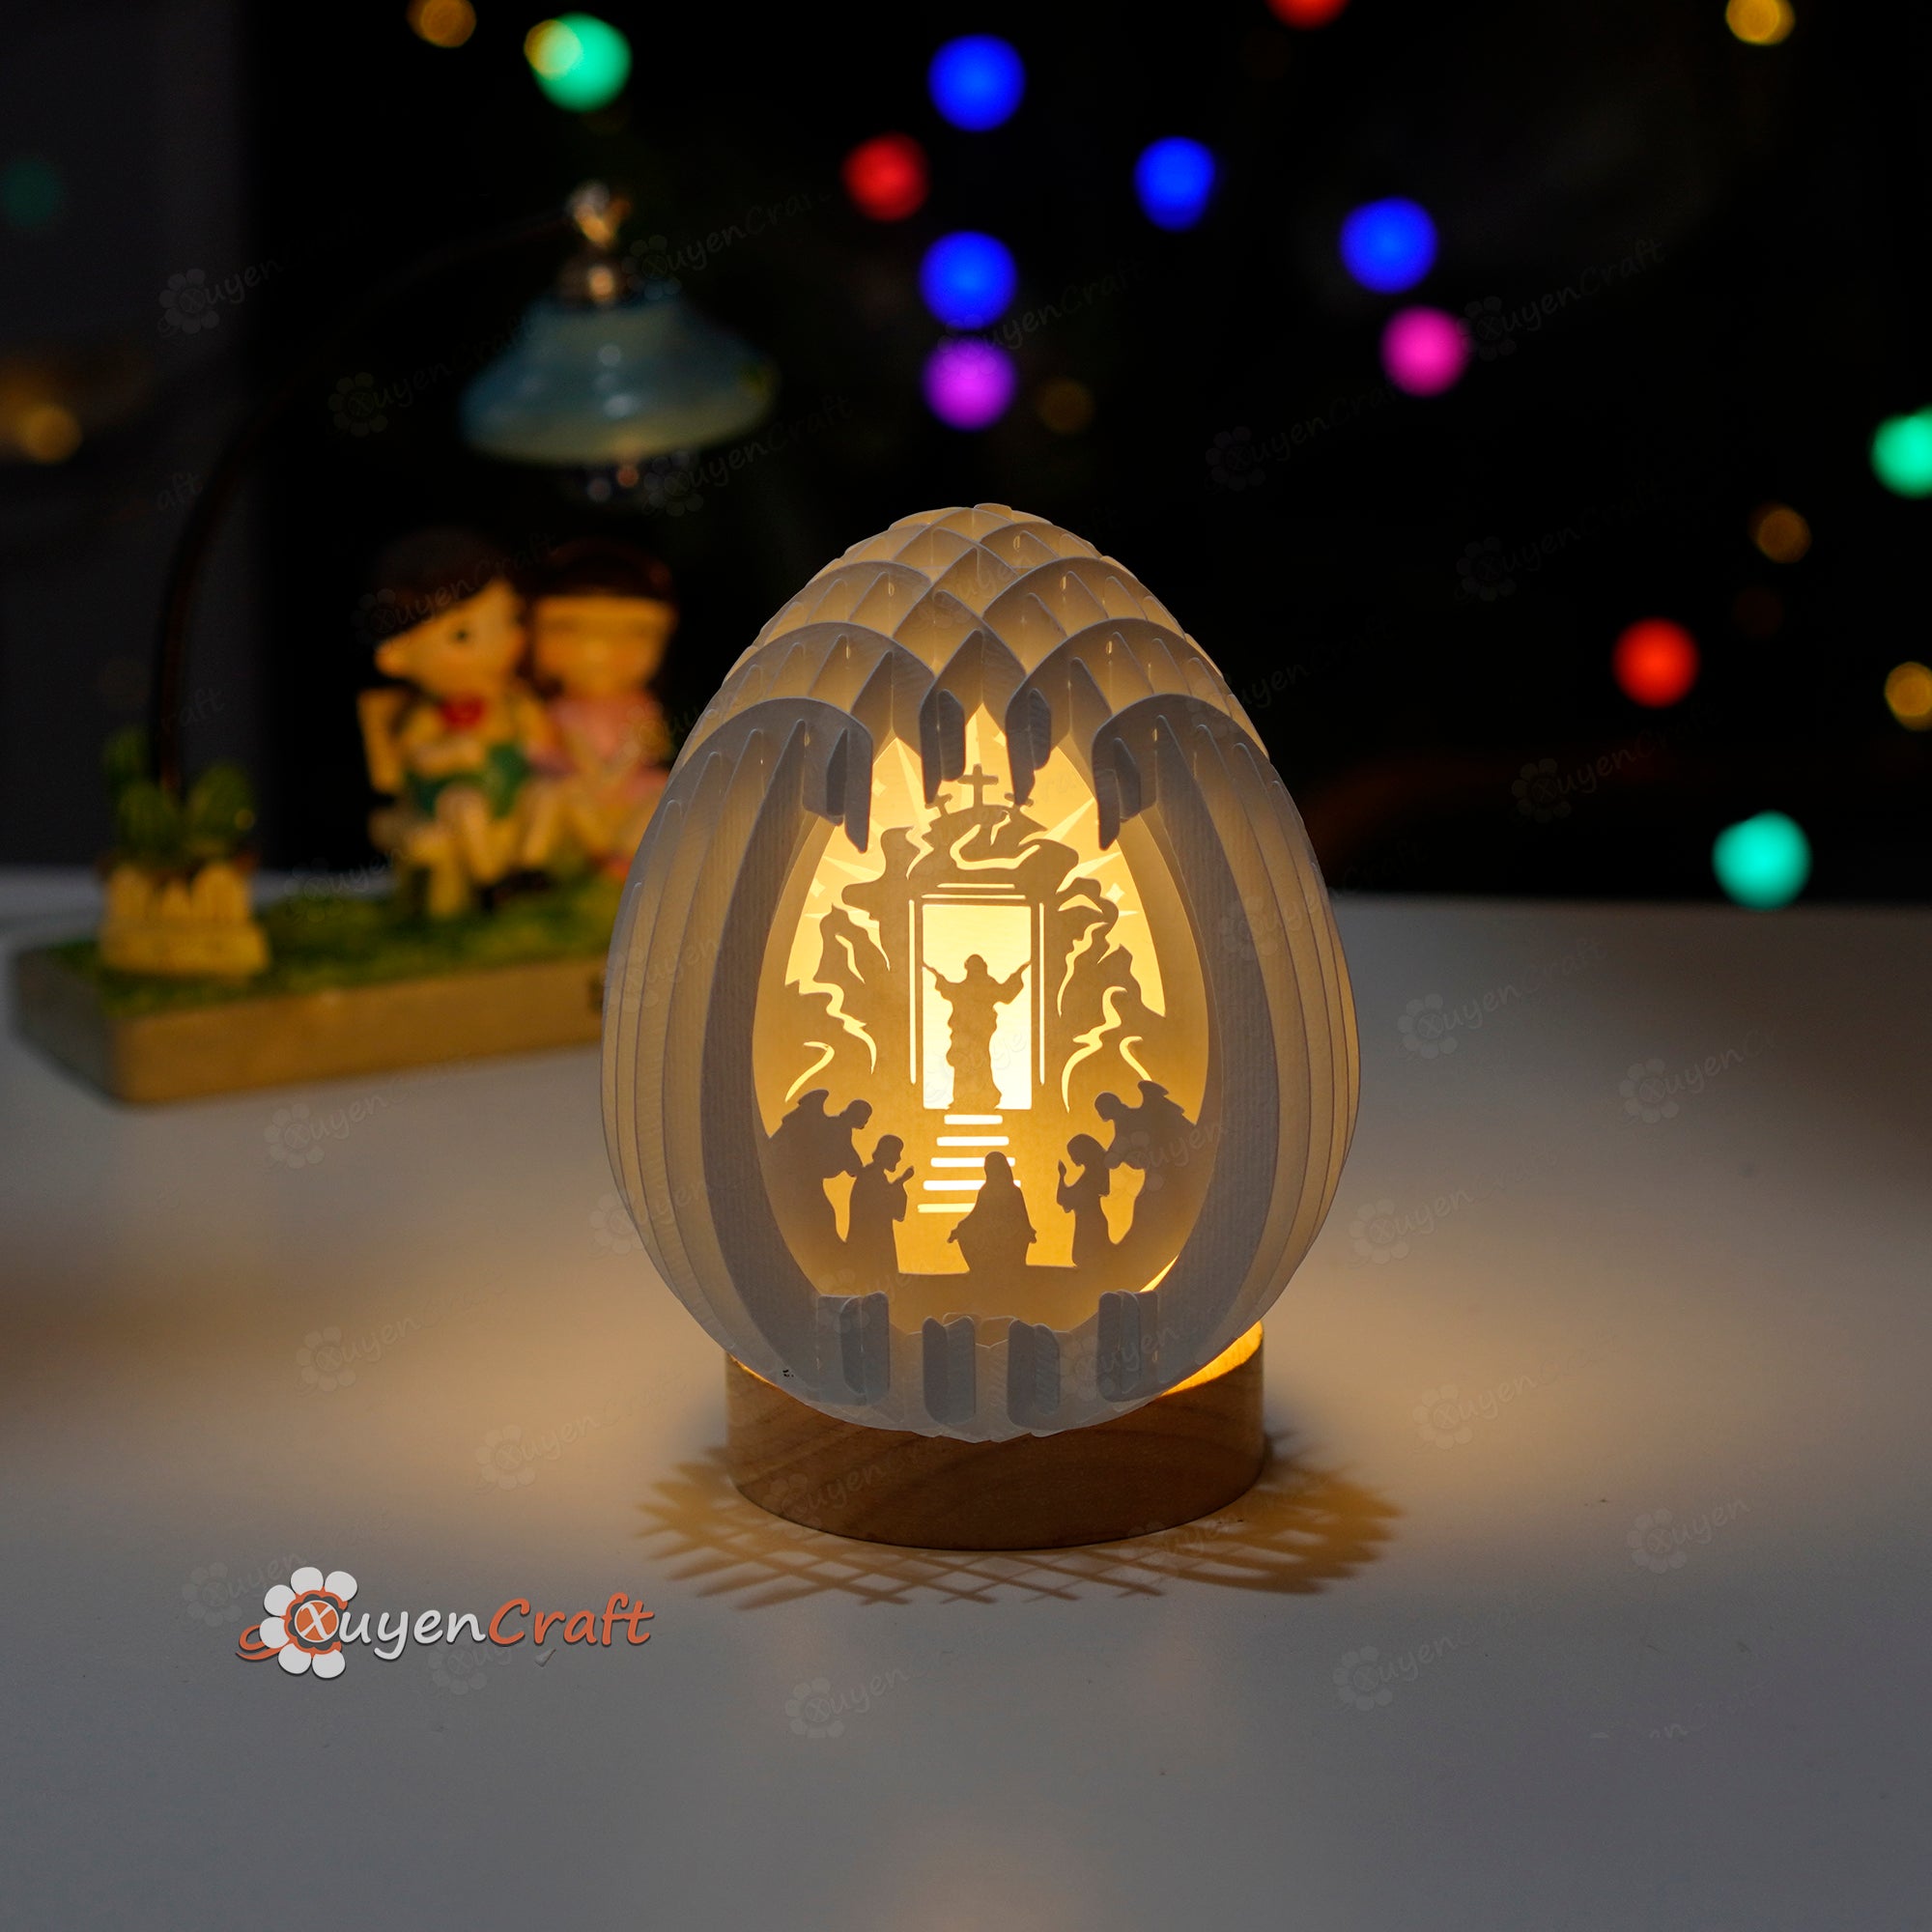 Pack 5 Jesus Risen and Nativity Scene in Small Eggs Pop Up PDF, SVG Template Compatible with Cricut Joy, Cameo4, ScanNcut